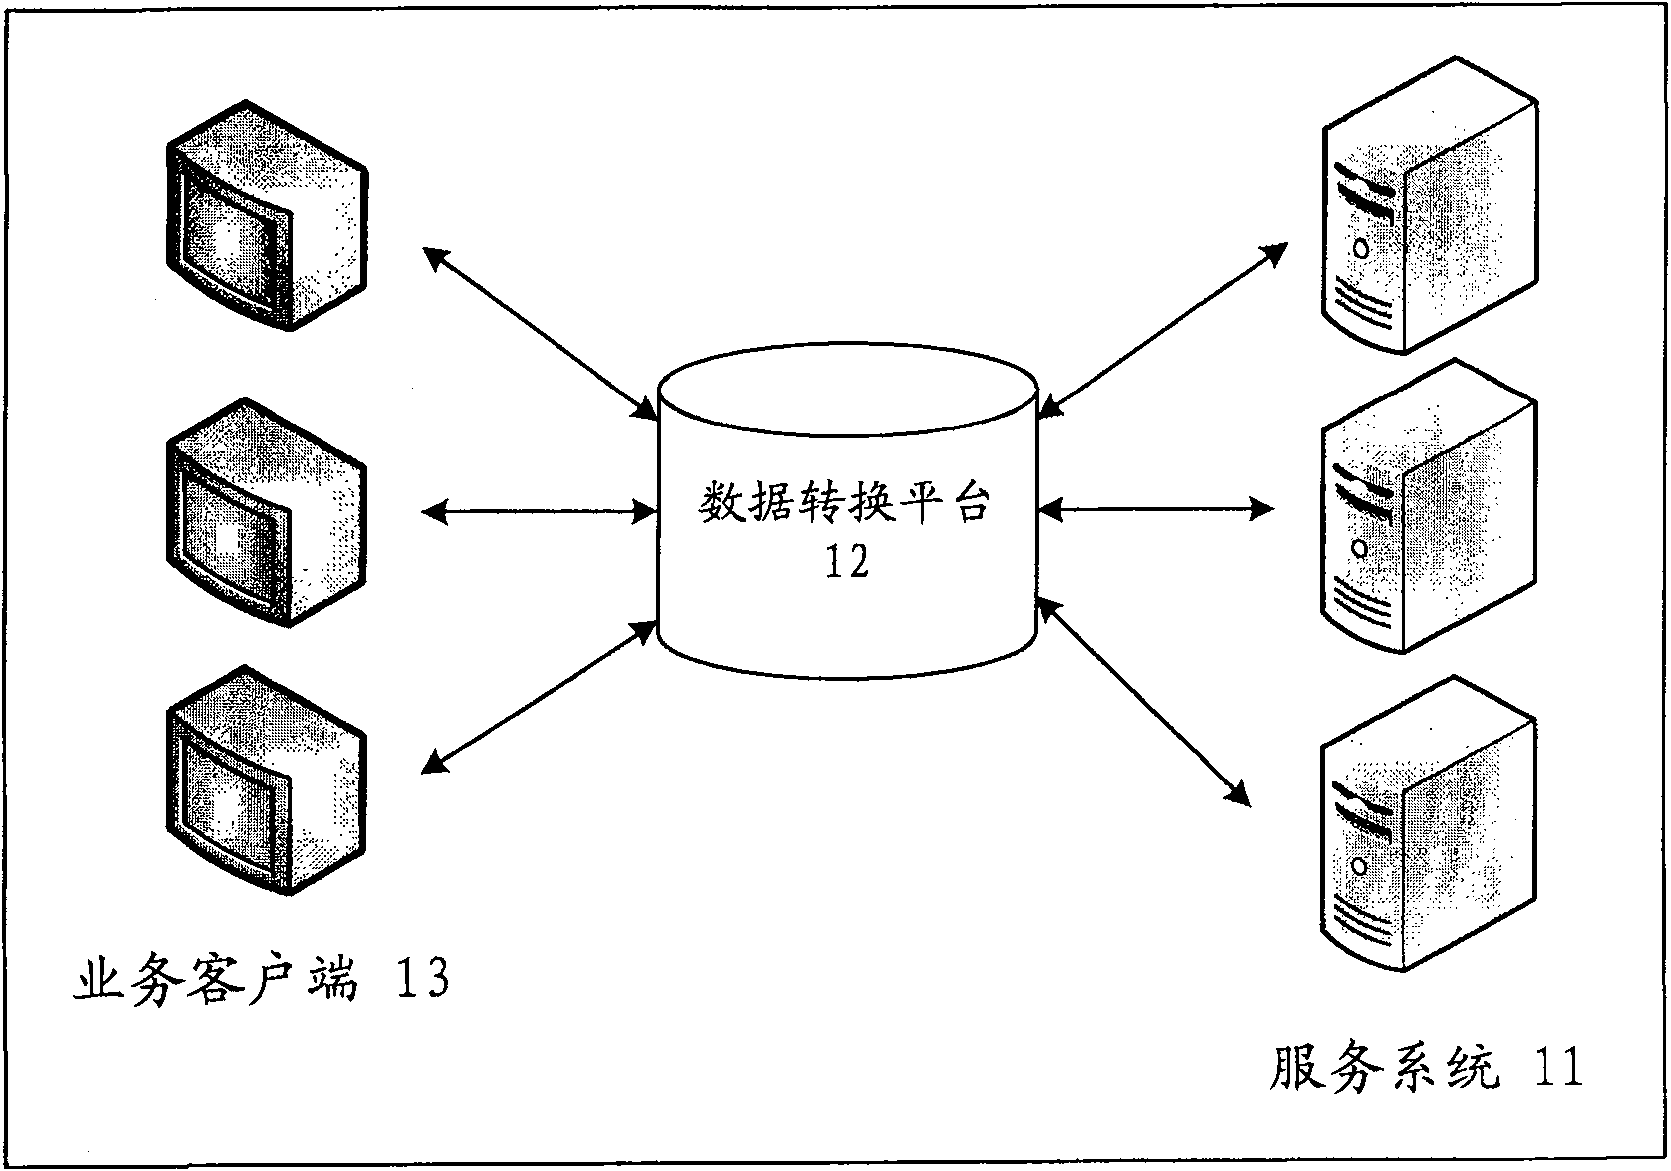 Multi-system error code management method, device and system